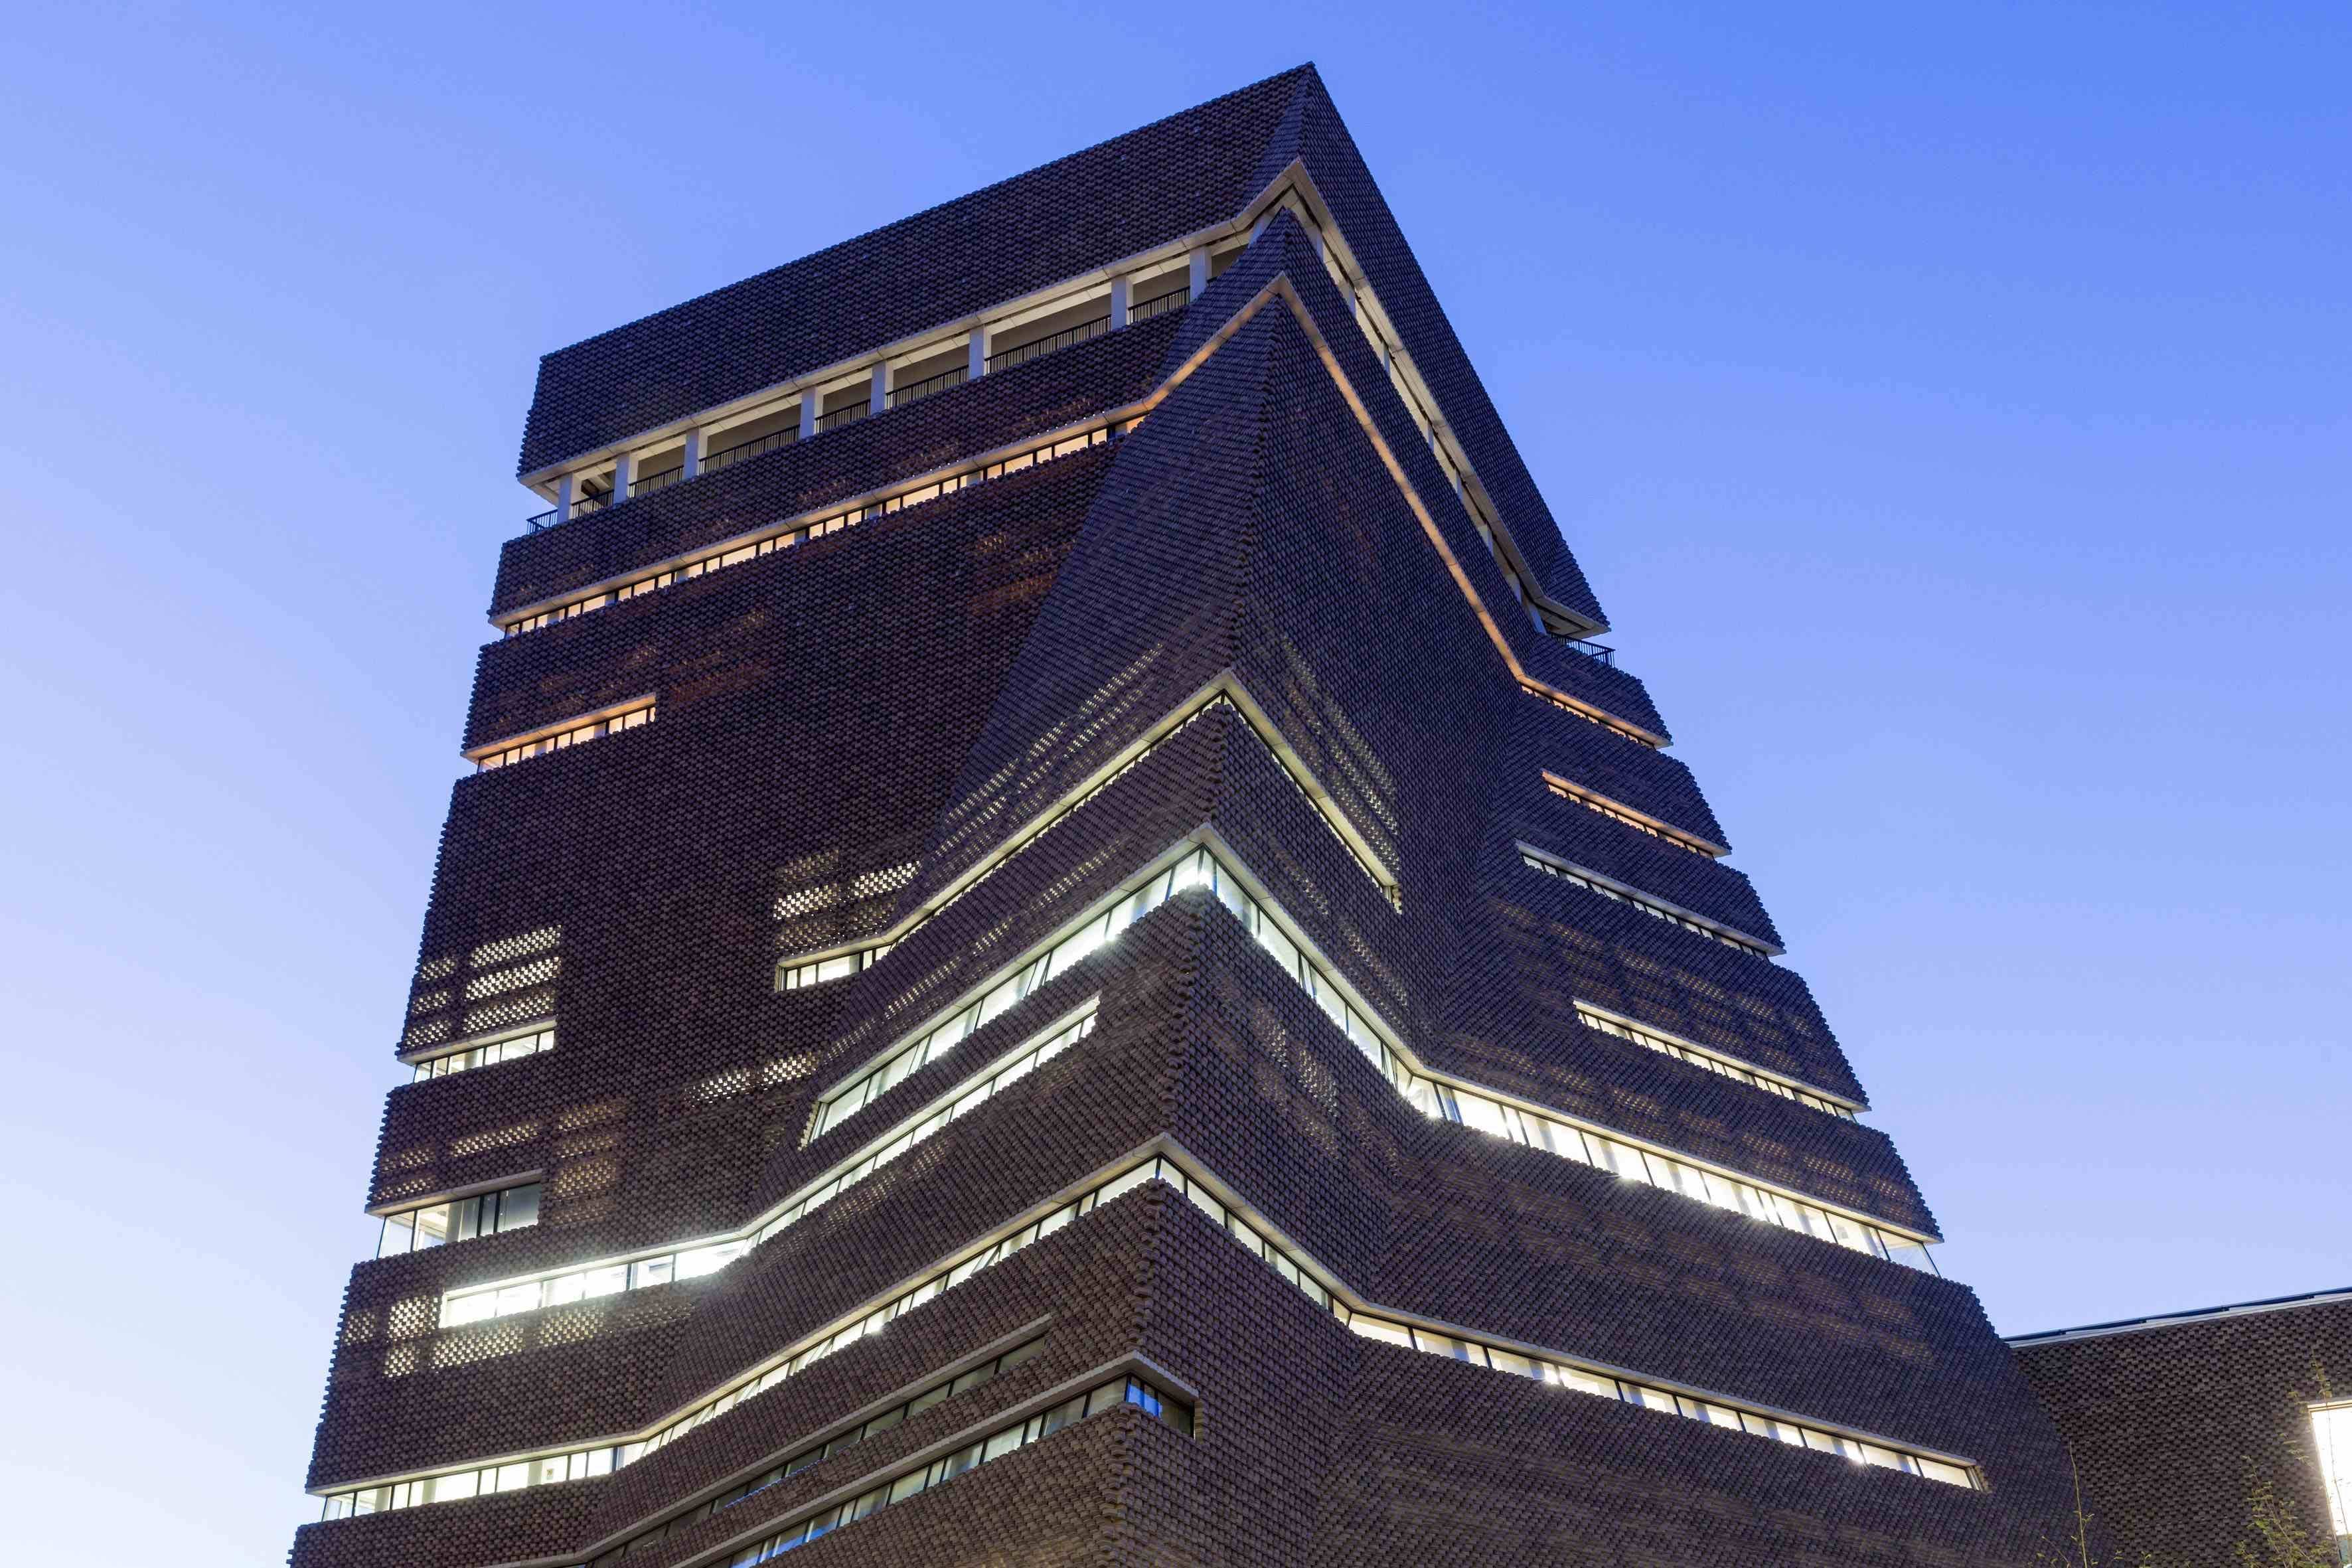 The new Tate Modern by Jacques Herzog and Pierre de Meuron